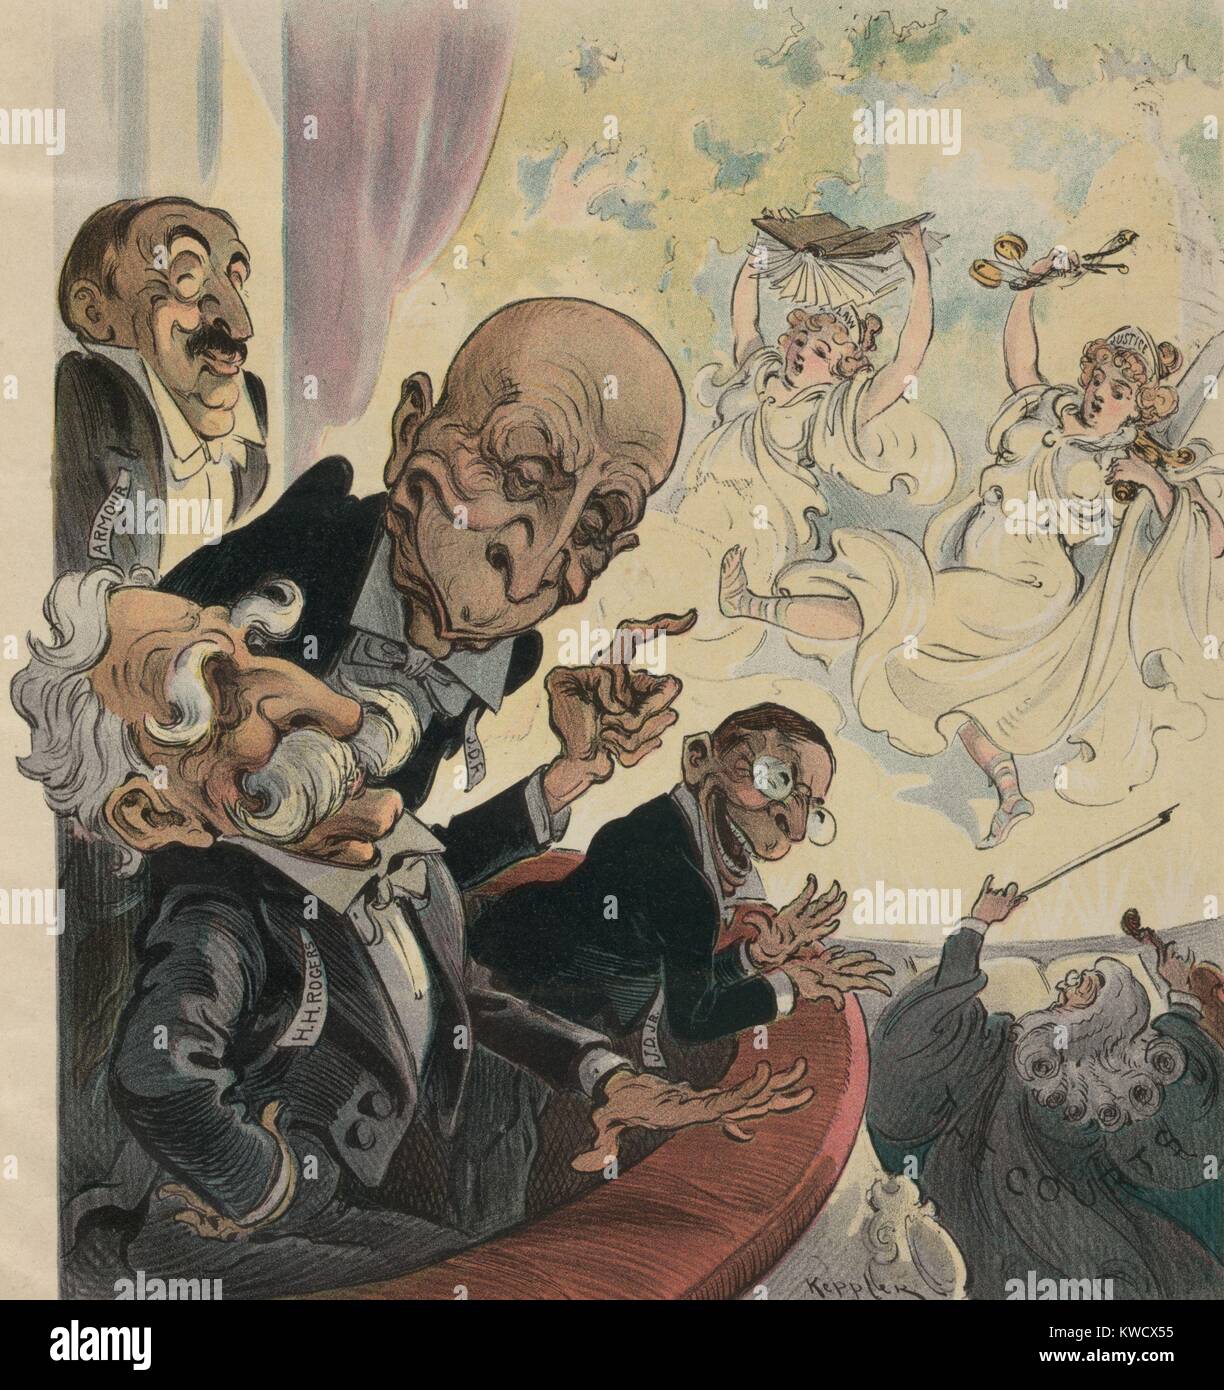 John D. Rockefeller, Sr. & Jr., Henry Huttleston Rogers, and Jonathan Ogden Armour at the theater. 1906 Puck Magazine political cartoon in which they enjoy the performance of Law, Justice, and the Courts. At the time, the businessmen were under pressure from reformers and progressives (BSLOC 2017 2 176) Stock Photo